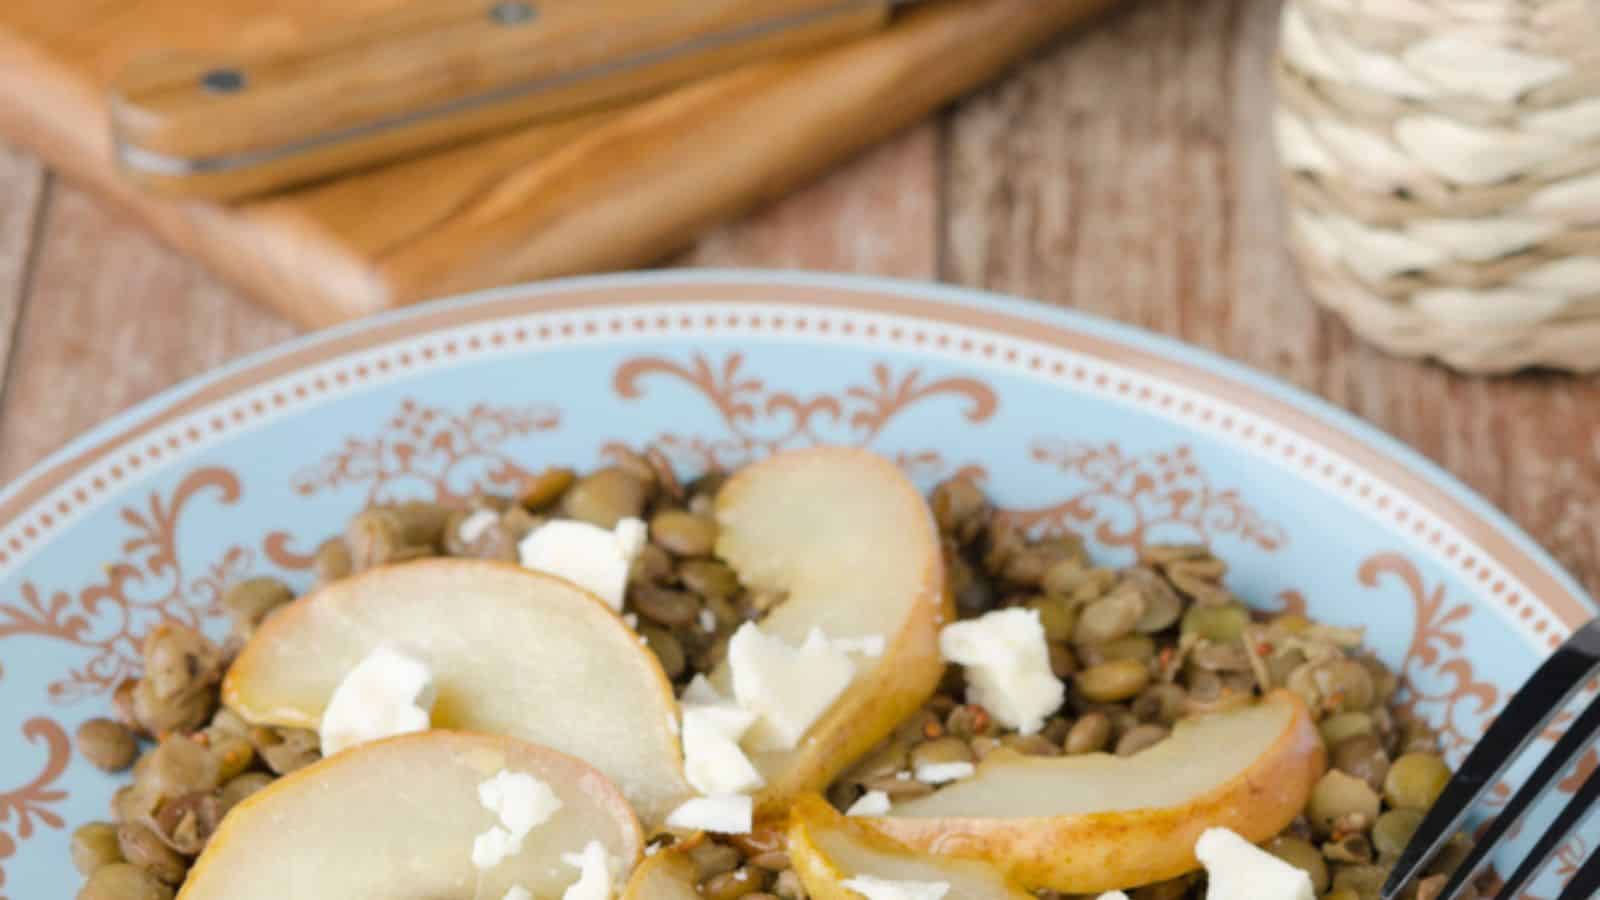 Lentil salad with caramelized pears and blue cheese